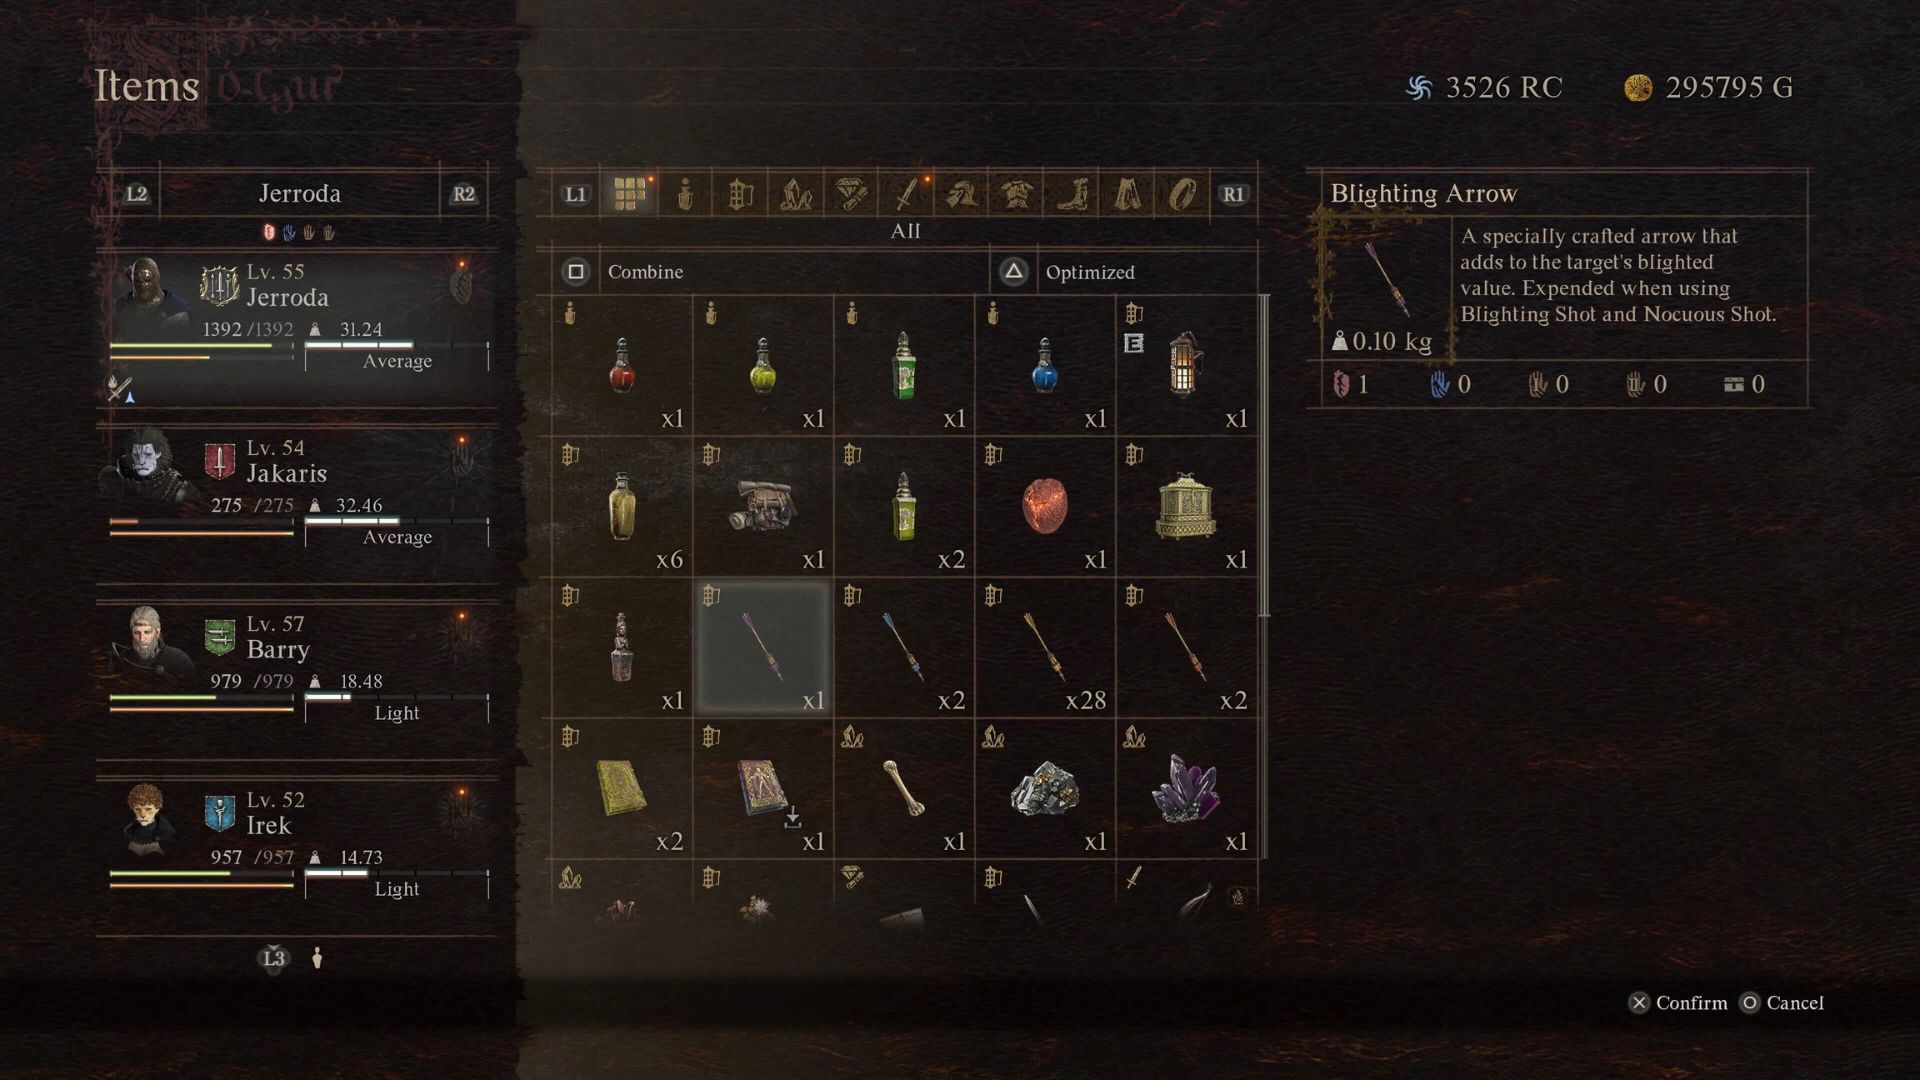 The Blighting Arrow as shown in the Dragon's Dogma 2 Items menu